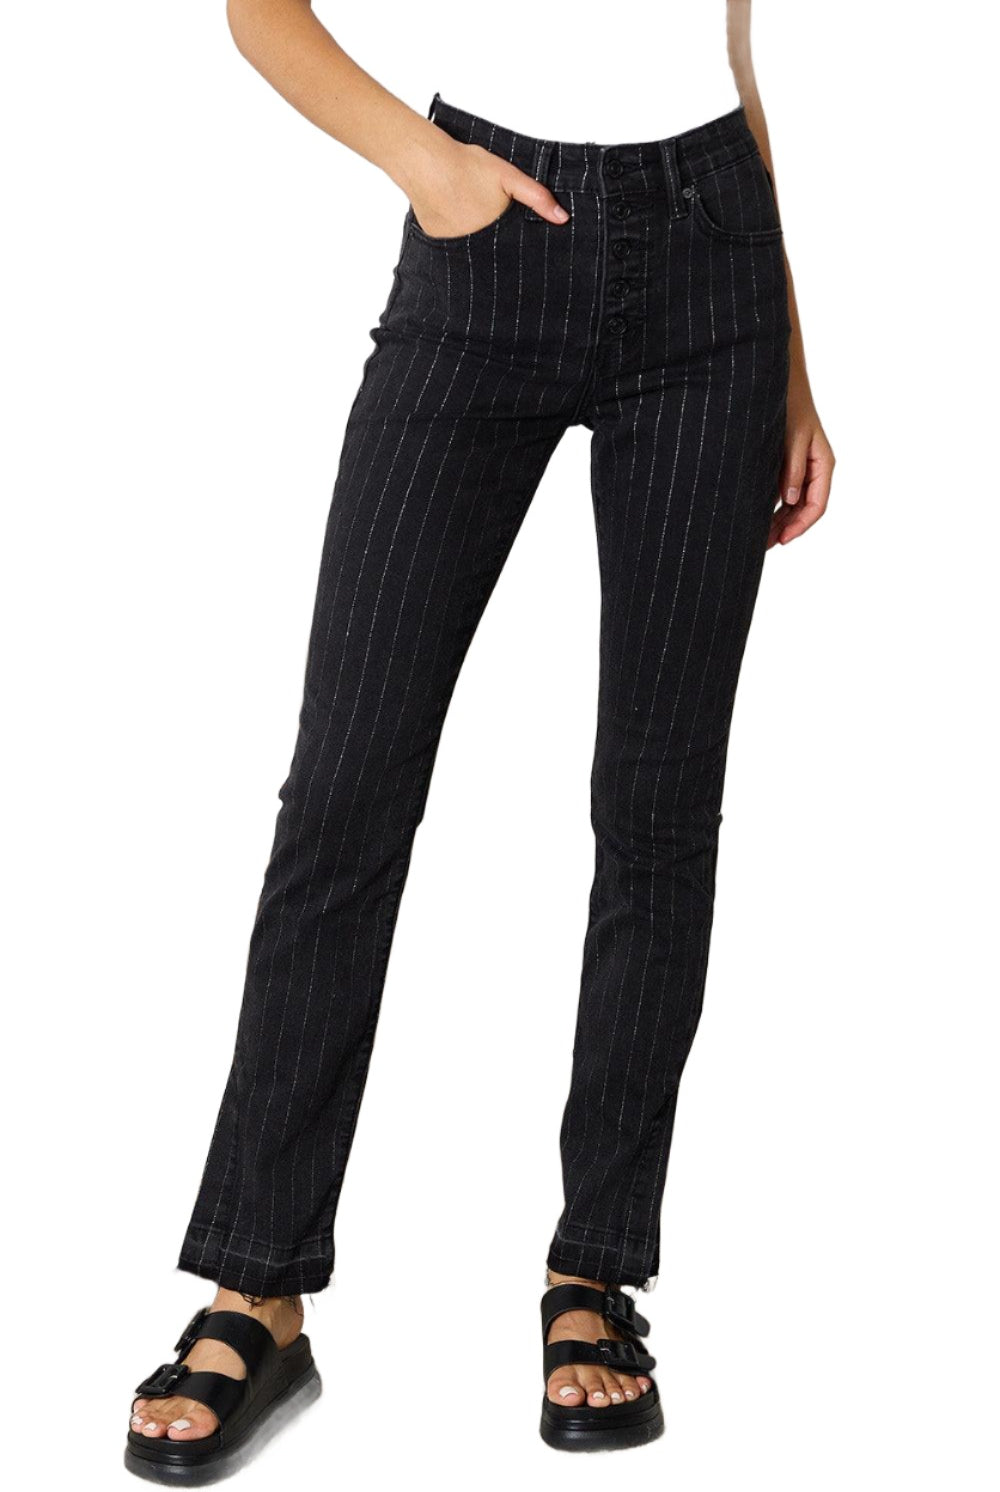 Women's Pants Kancan Striped Pants with Pockets